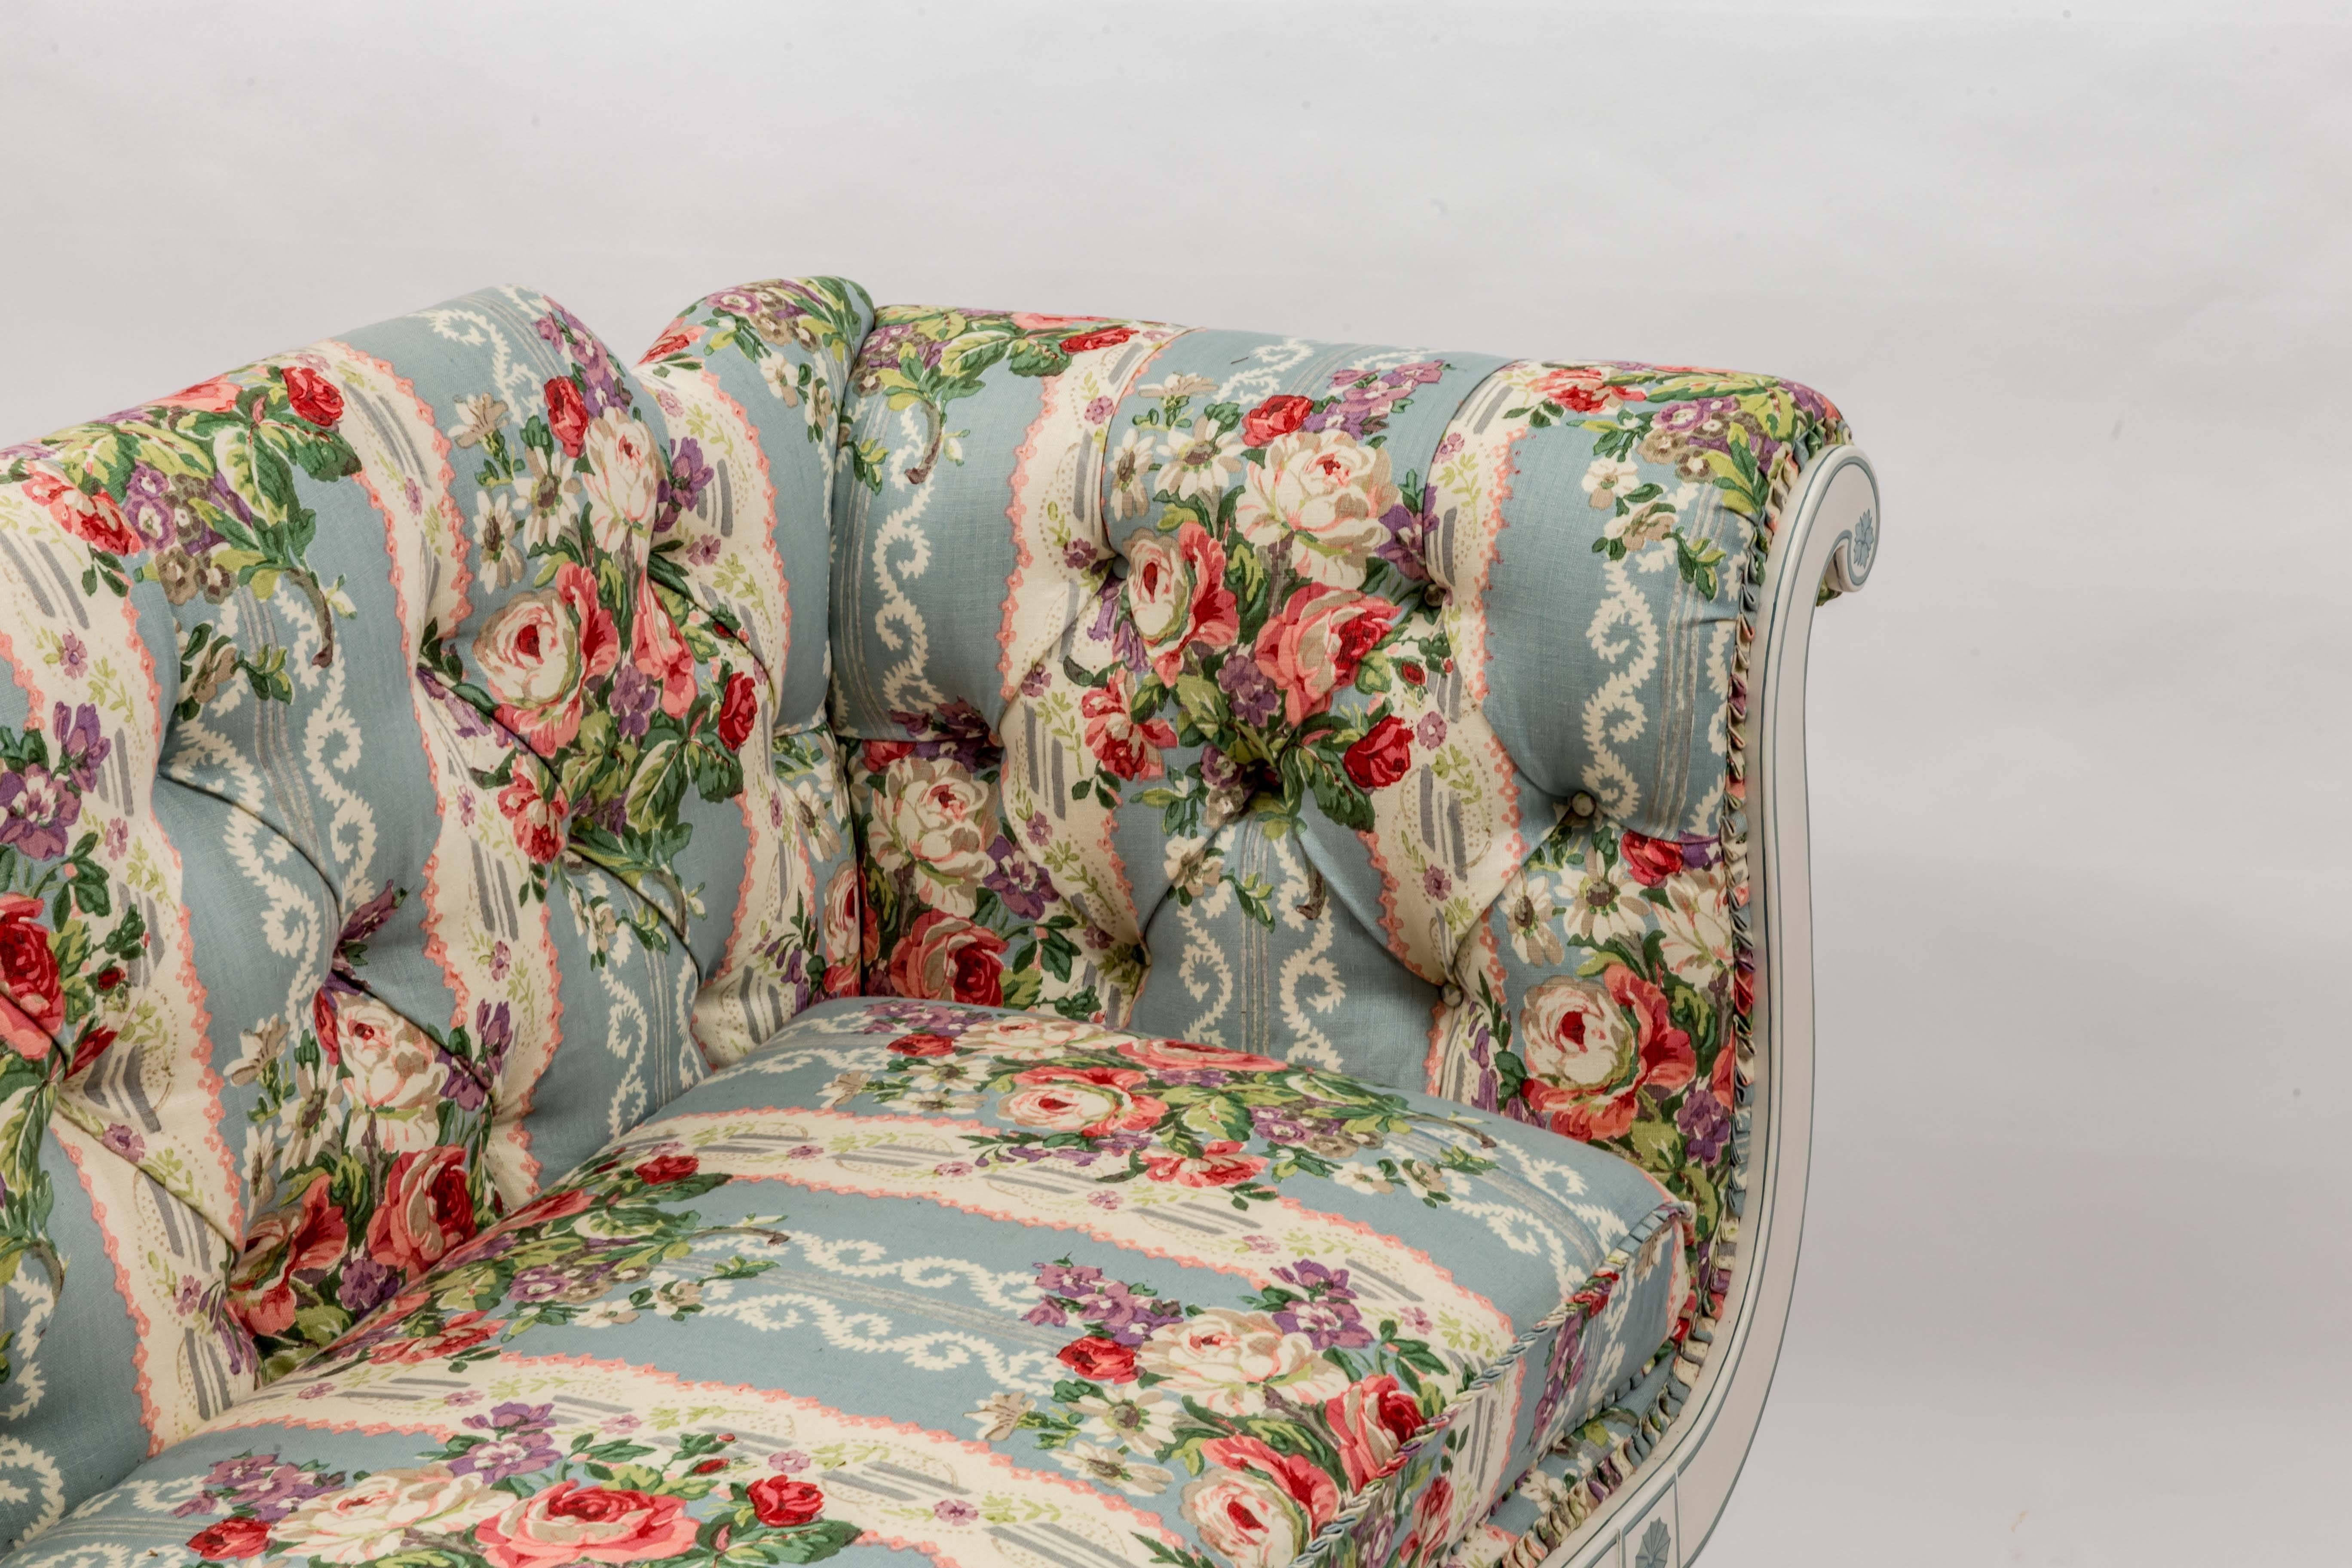 19th Century English Regency Settee in Floral Linen Print Fabric 4